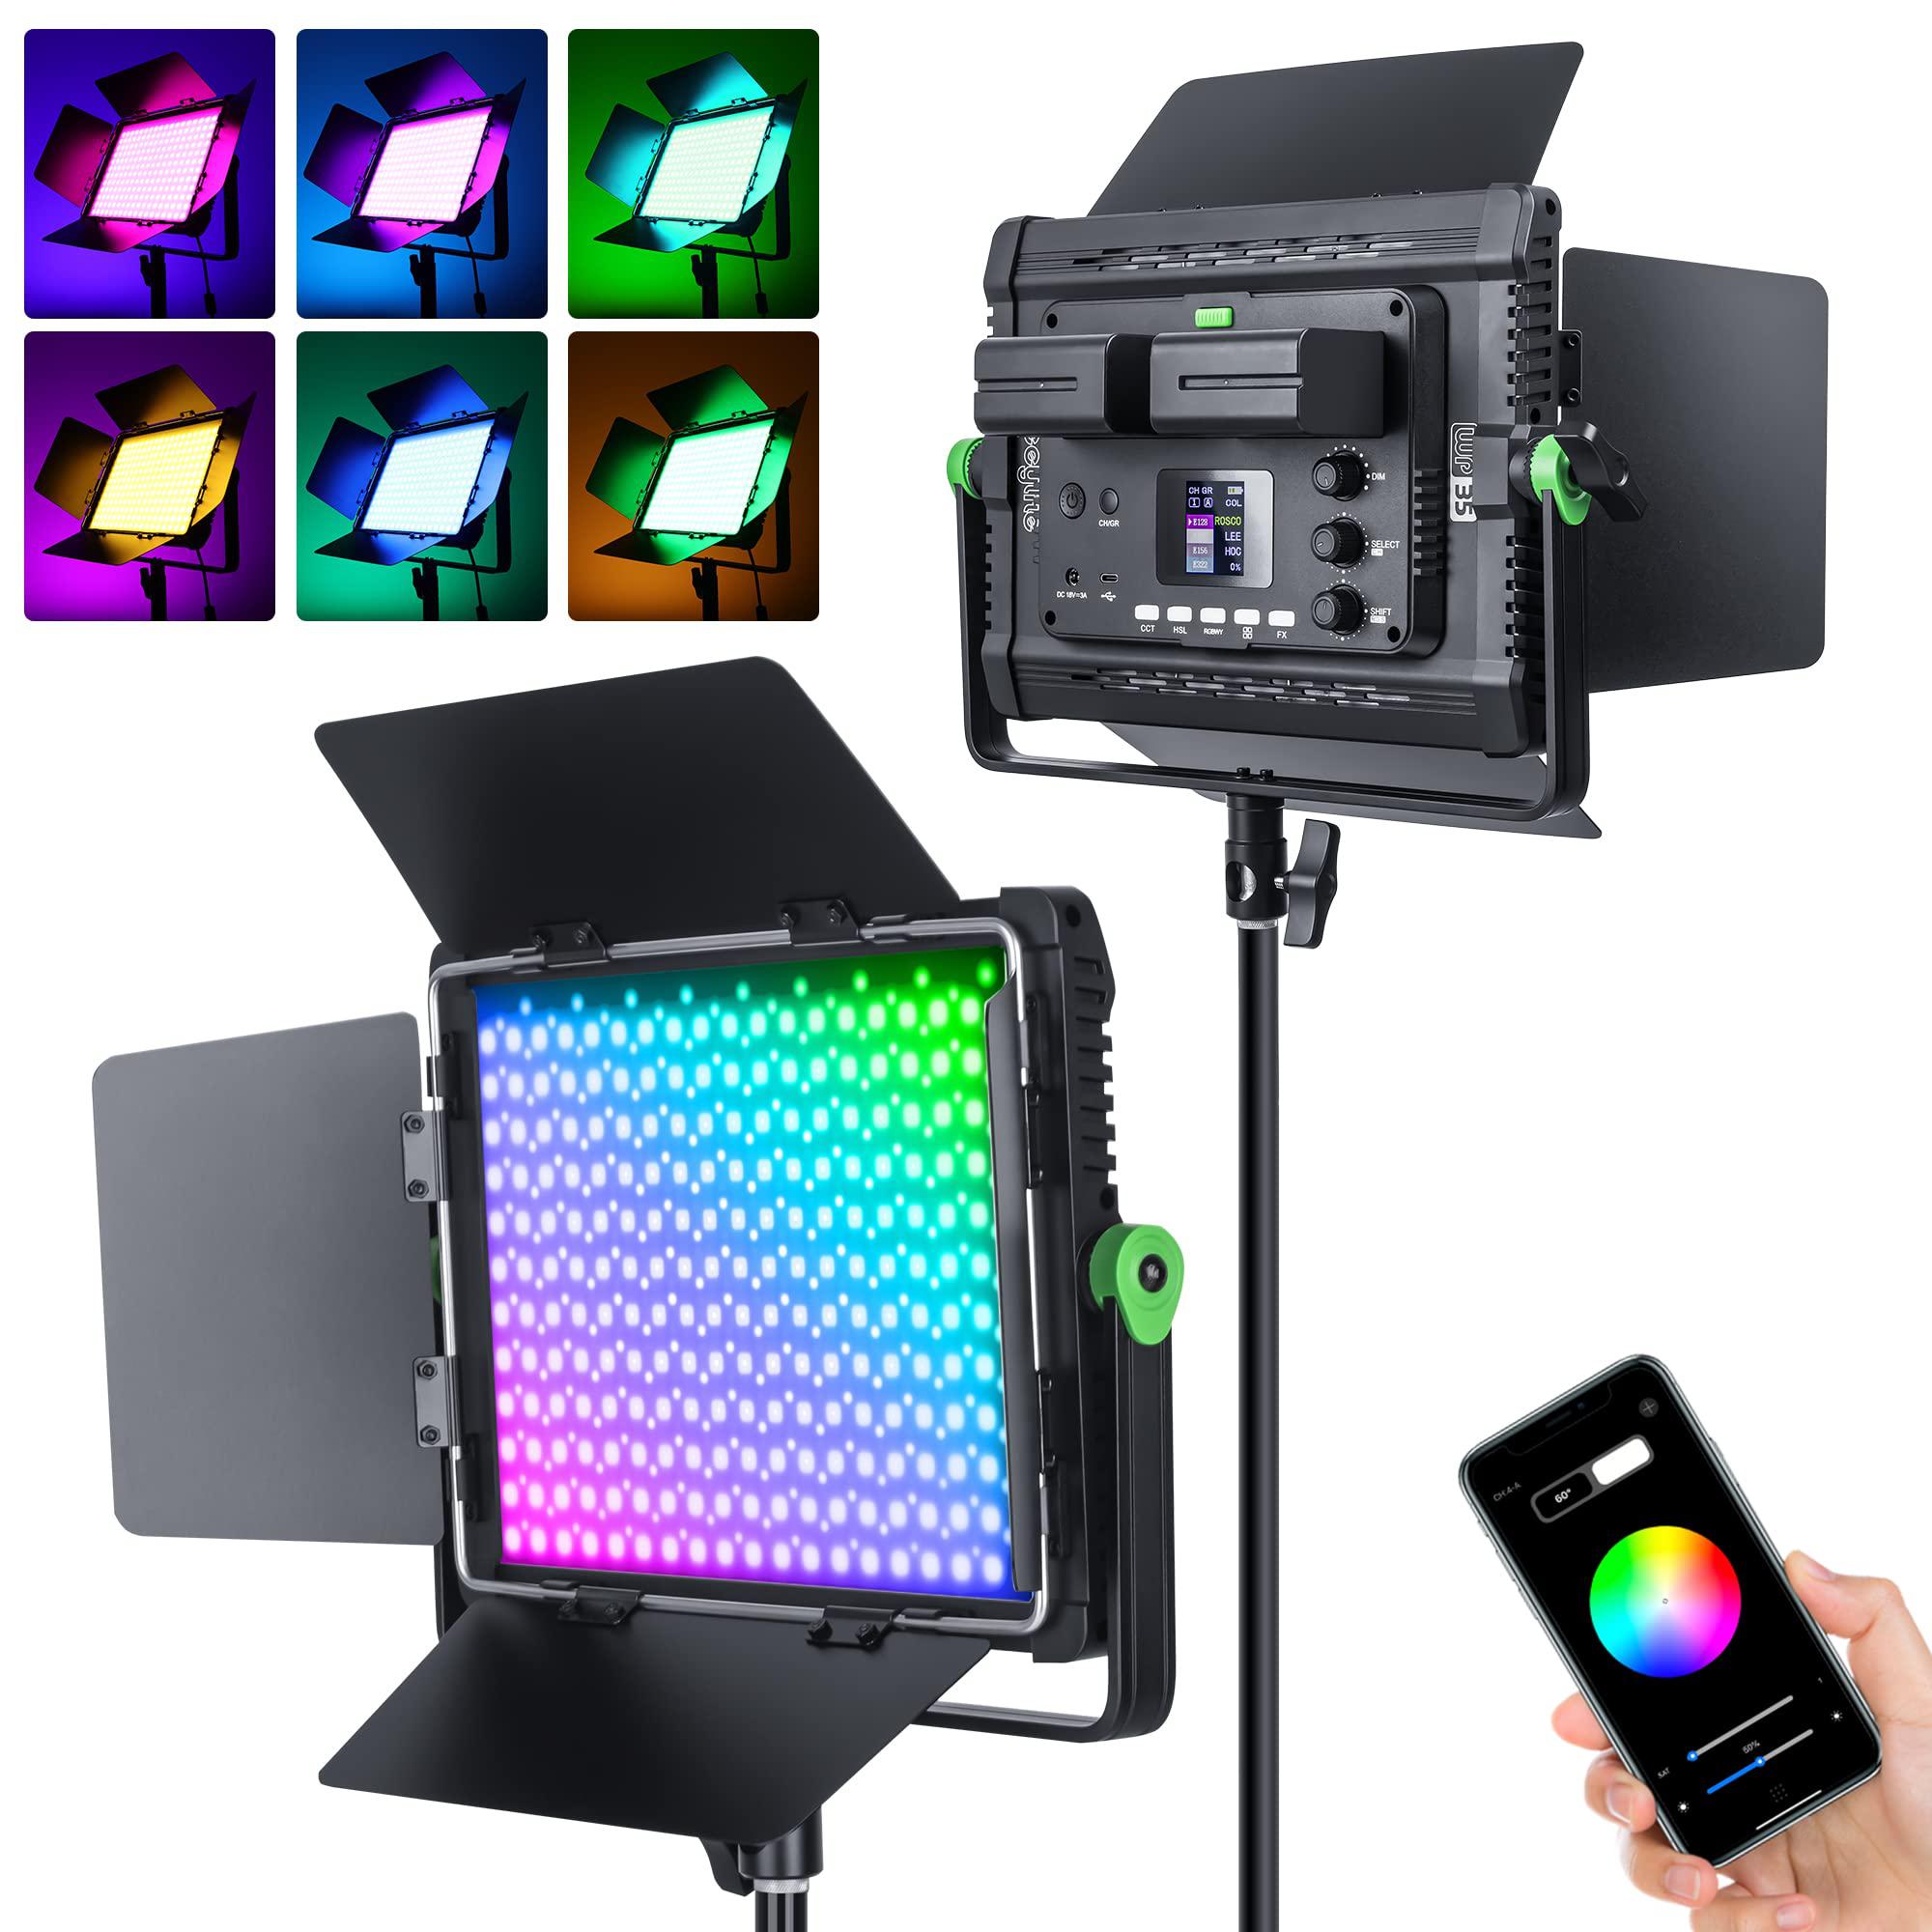 viltrox 30w rgb led photography light panel, bi-color variable 2800k~6800k with app control for video photography, cri97+ tlc